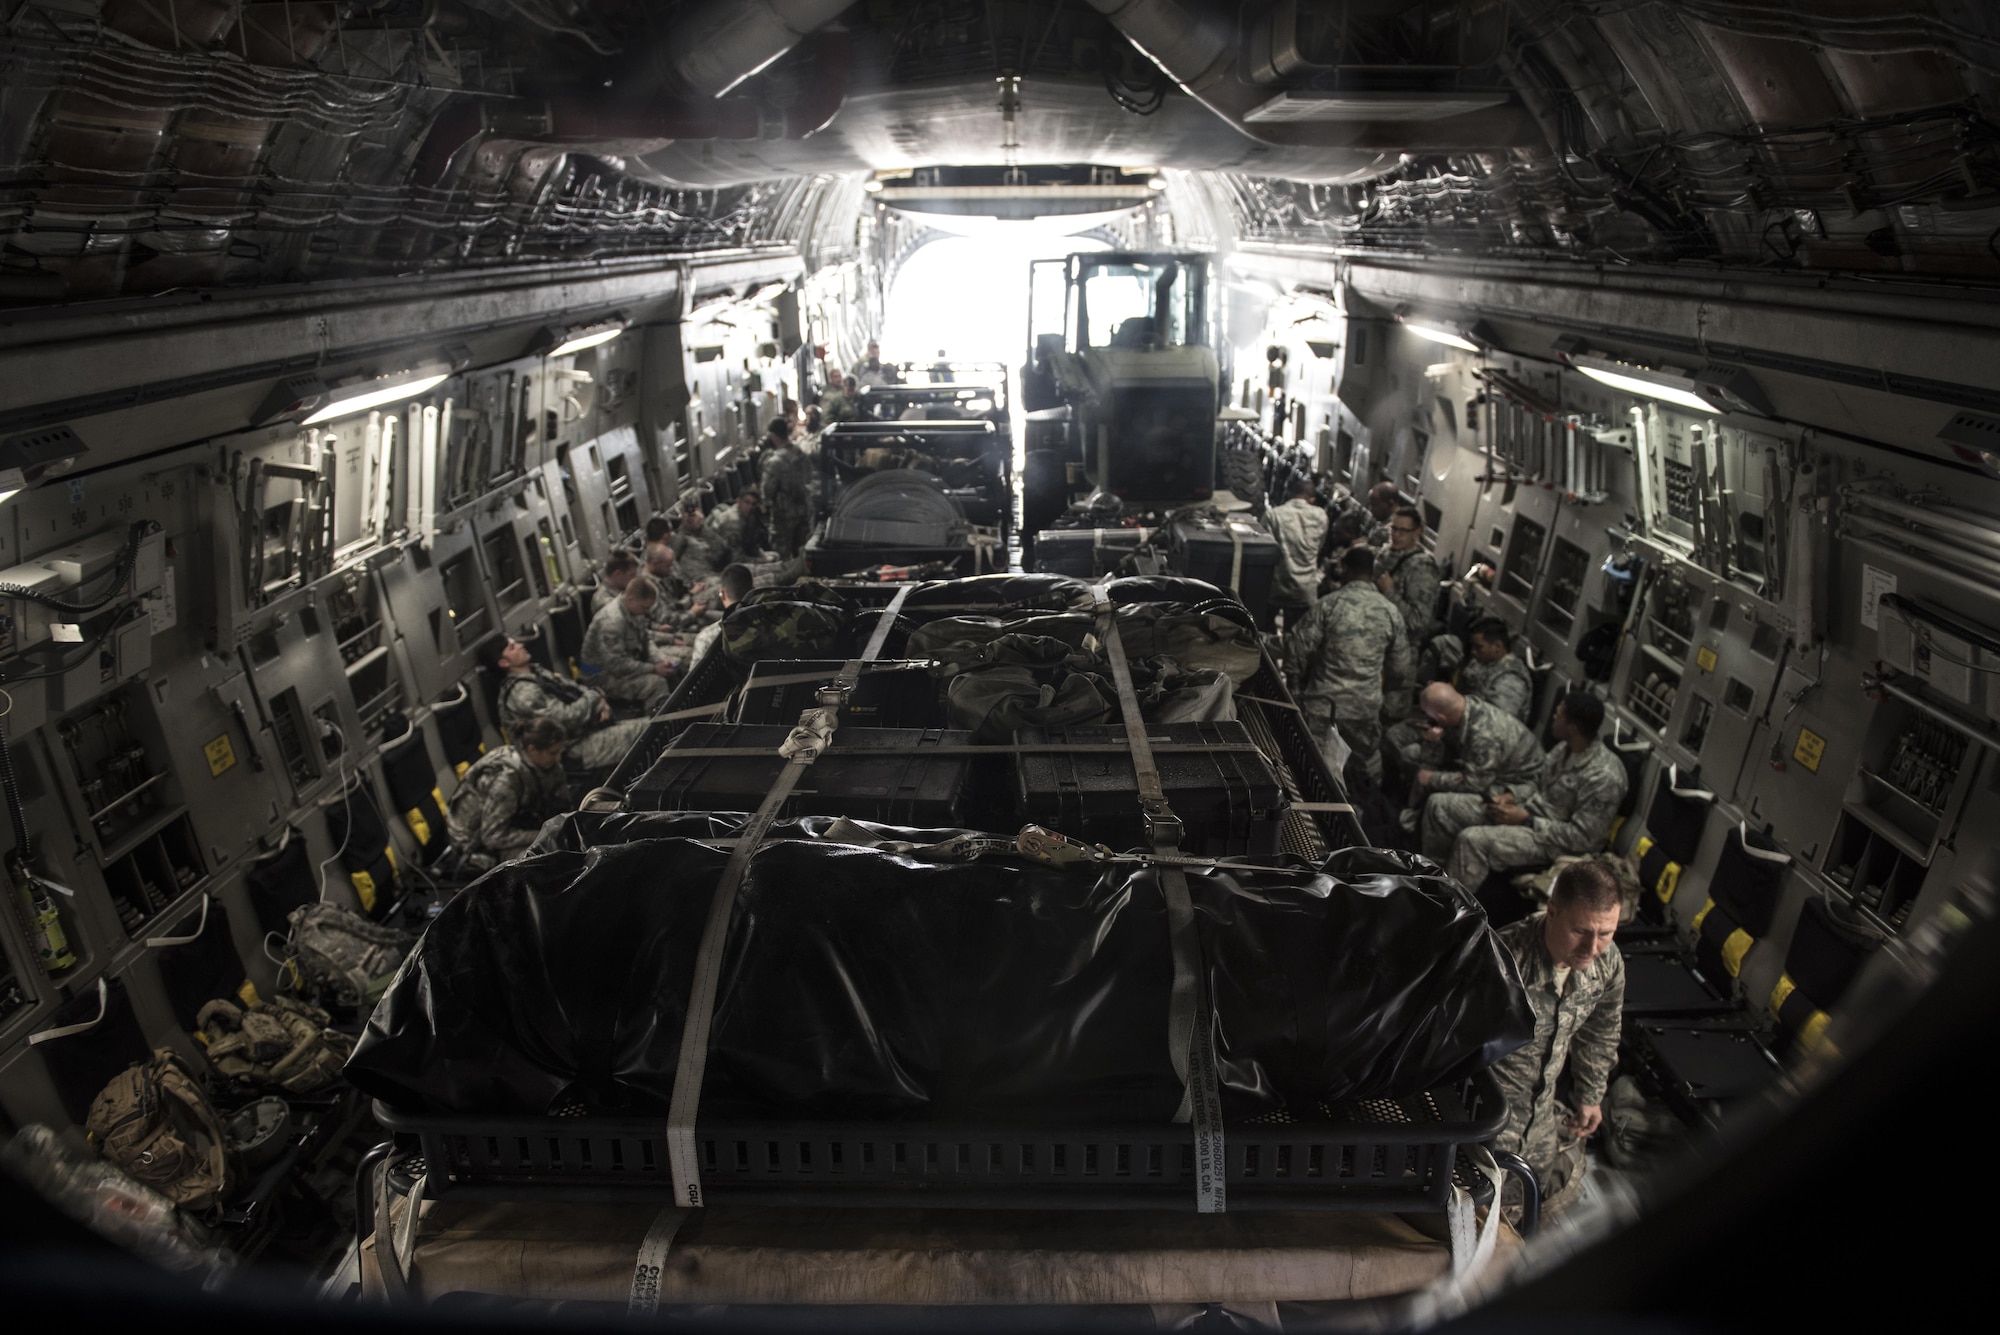 More than 30 members of the 621st Contingency Response Wing aboard a C-17 Globemaster III at Joint Base McGuire-Dix-Lakehurst, N.J. wait for equipment to be loaded on before takeoff on their way to Port-au-Prince, Haiti in response to Hurricane Matthew, October 6, 2016. The CRW is supporting the government of Haiti's request for humanitarian assistance. Once on the ground, the CRW will provide assistance by facilitating the movement of humanitarian aid and cargo.